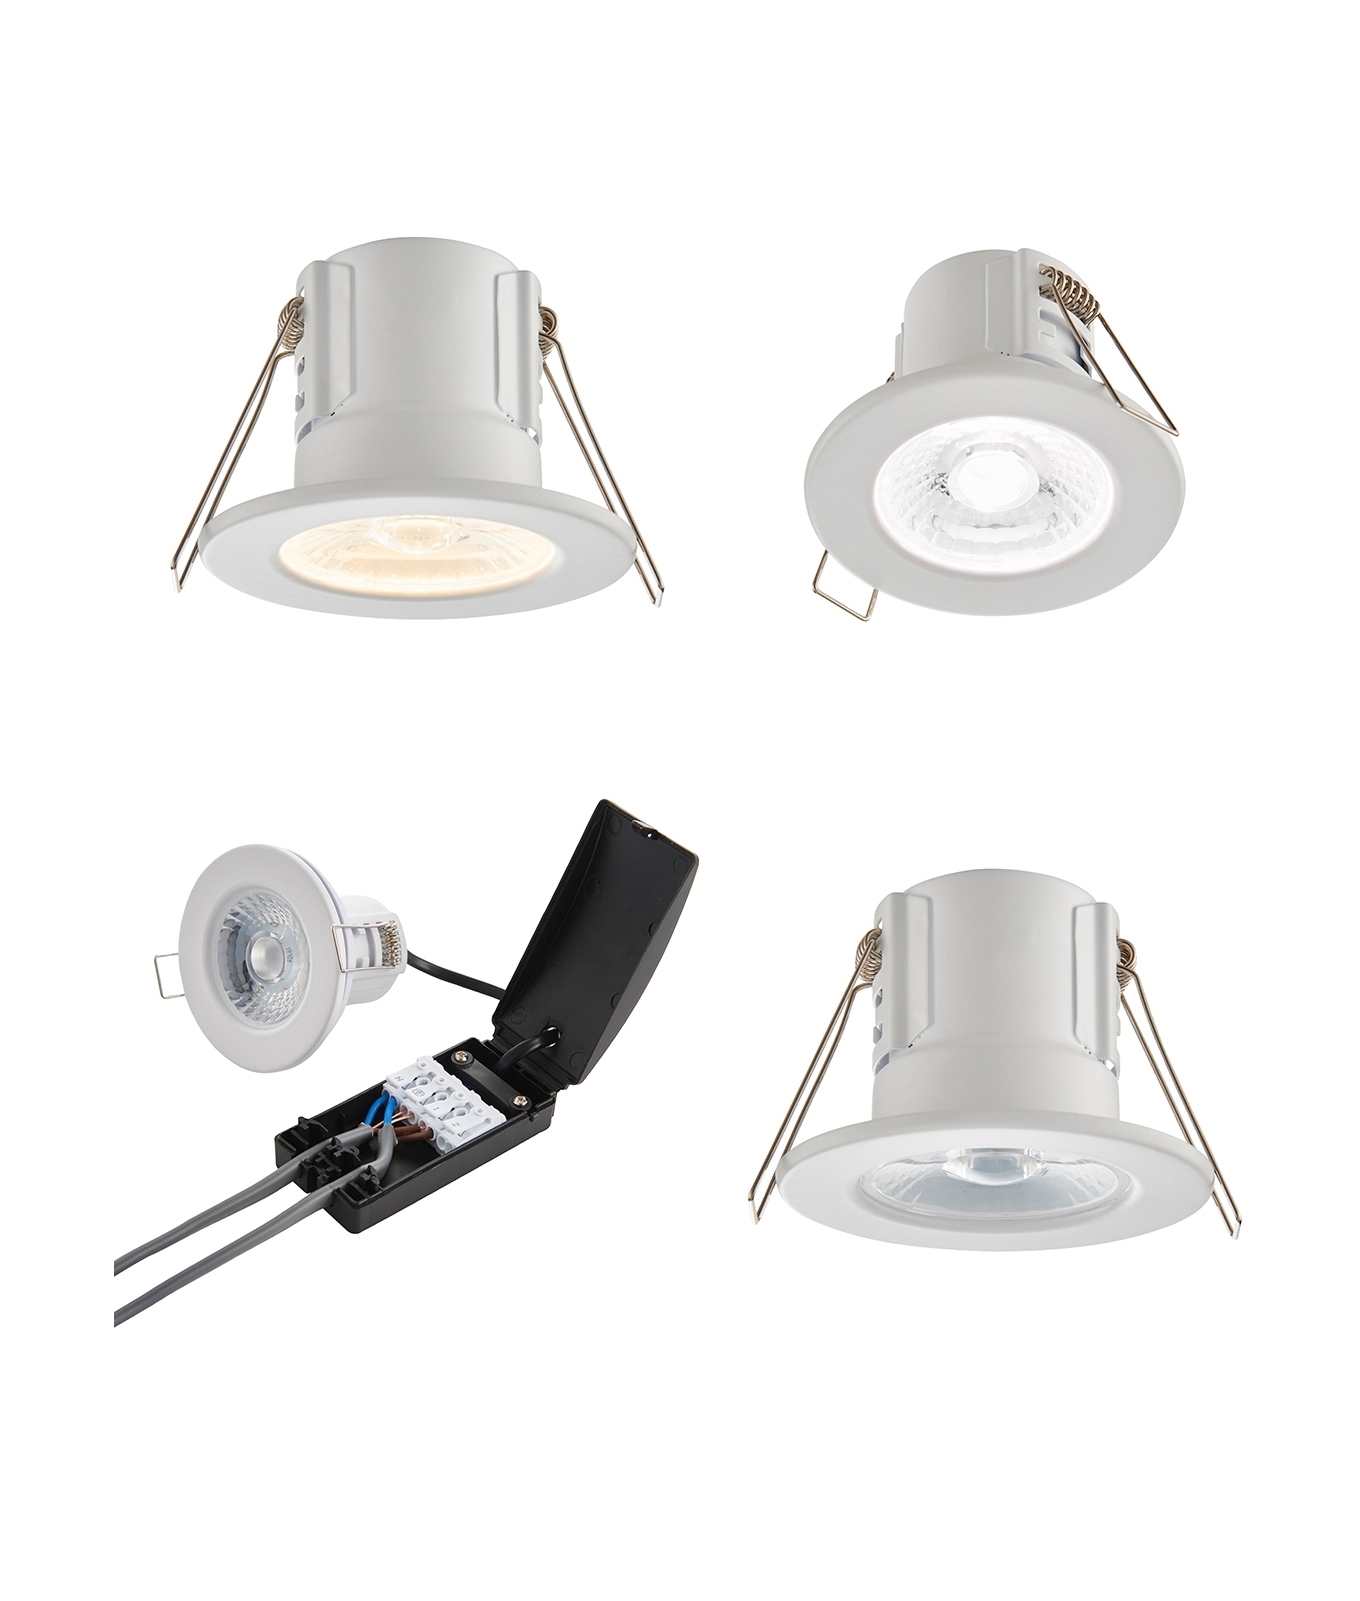 4 x Fire Rated FIXED GU10 in WHITE Downlights with 4watts LED BULBS Inc 